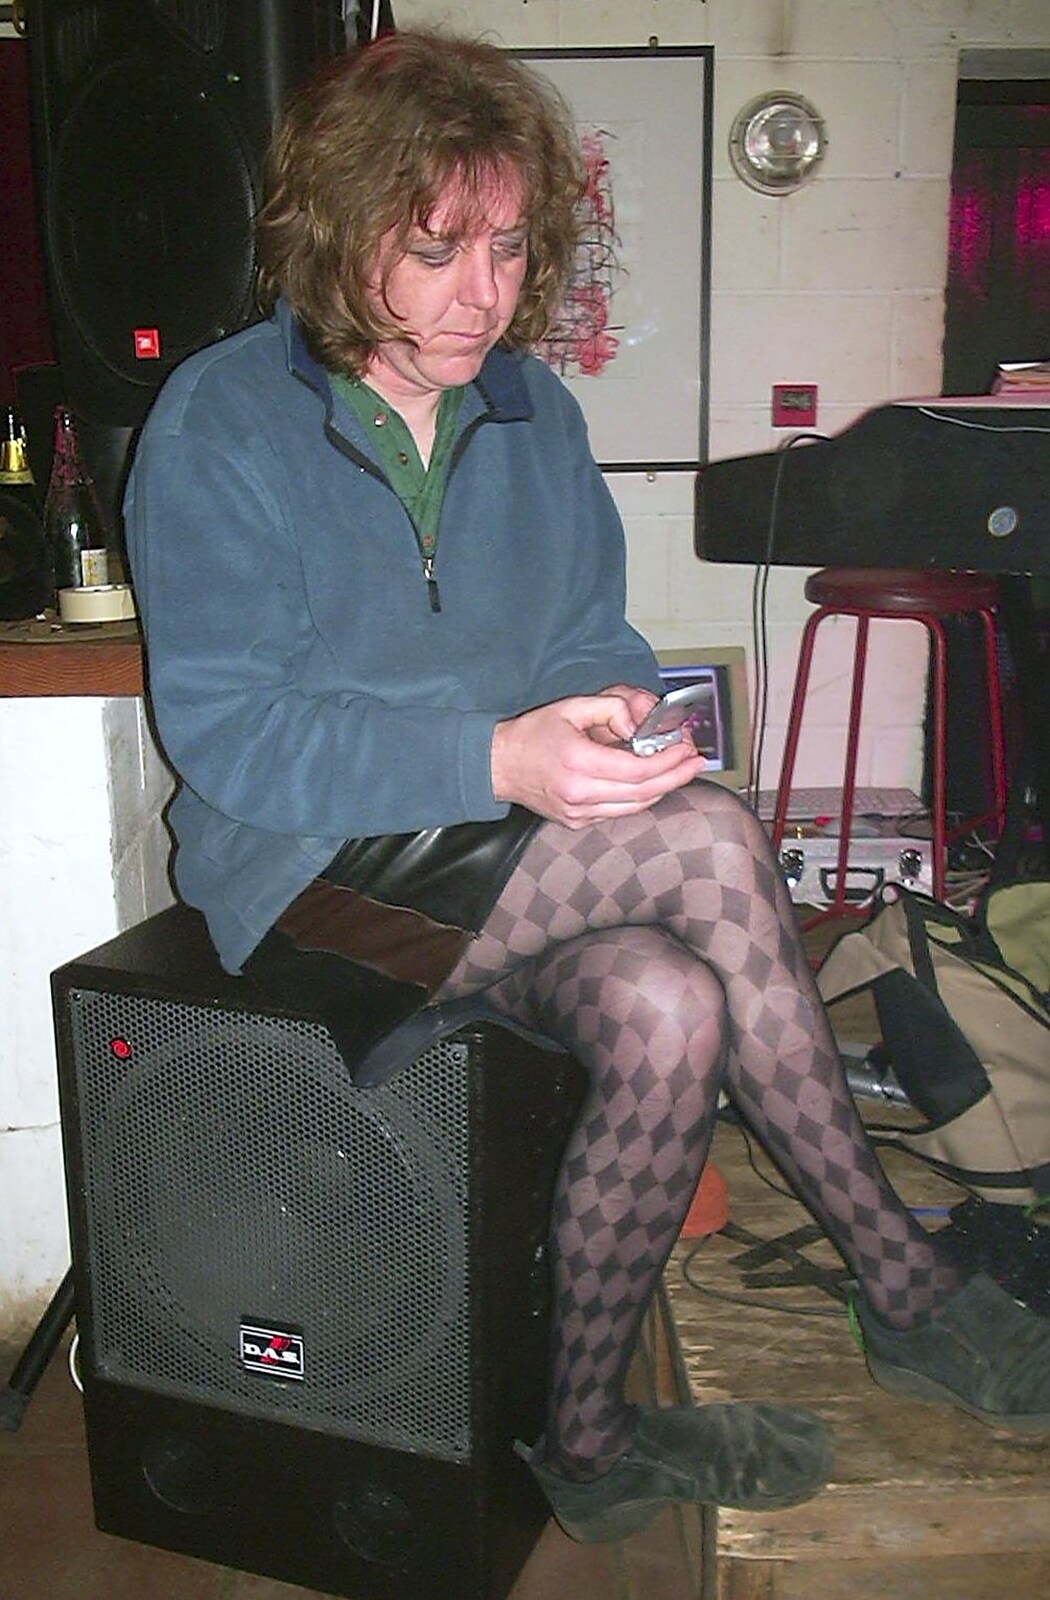 Max in some fishnet stockings from The BBs do New Year's Eve at The Cider Shed, Banham, Norfolk - 31st December 2003